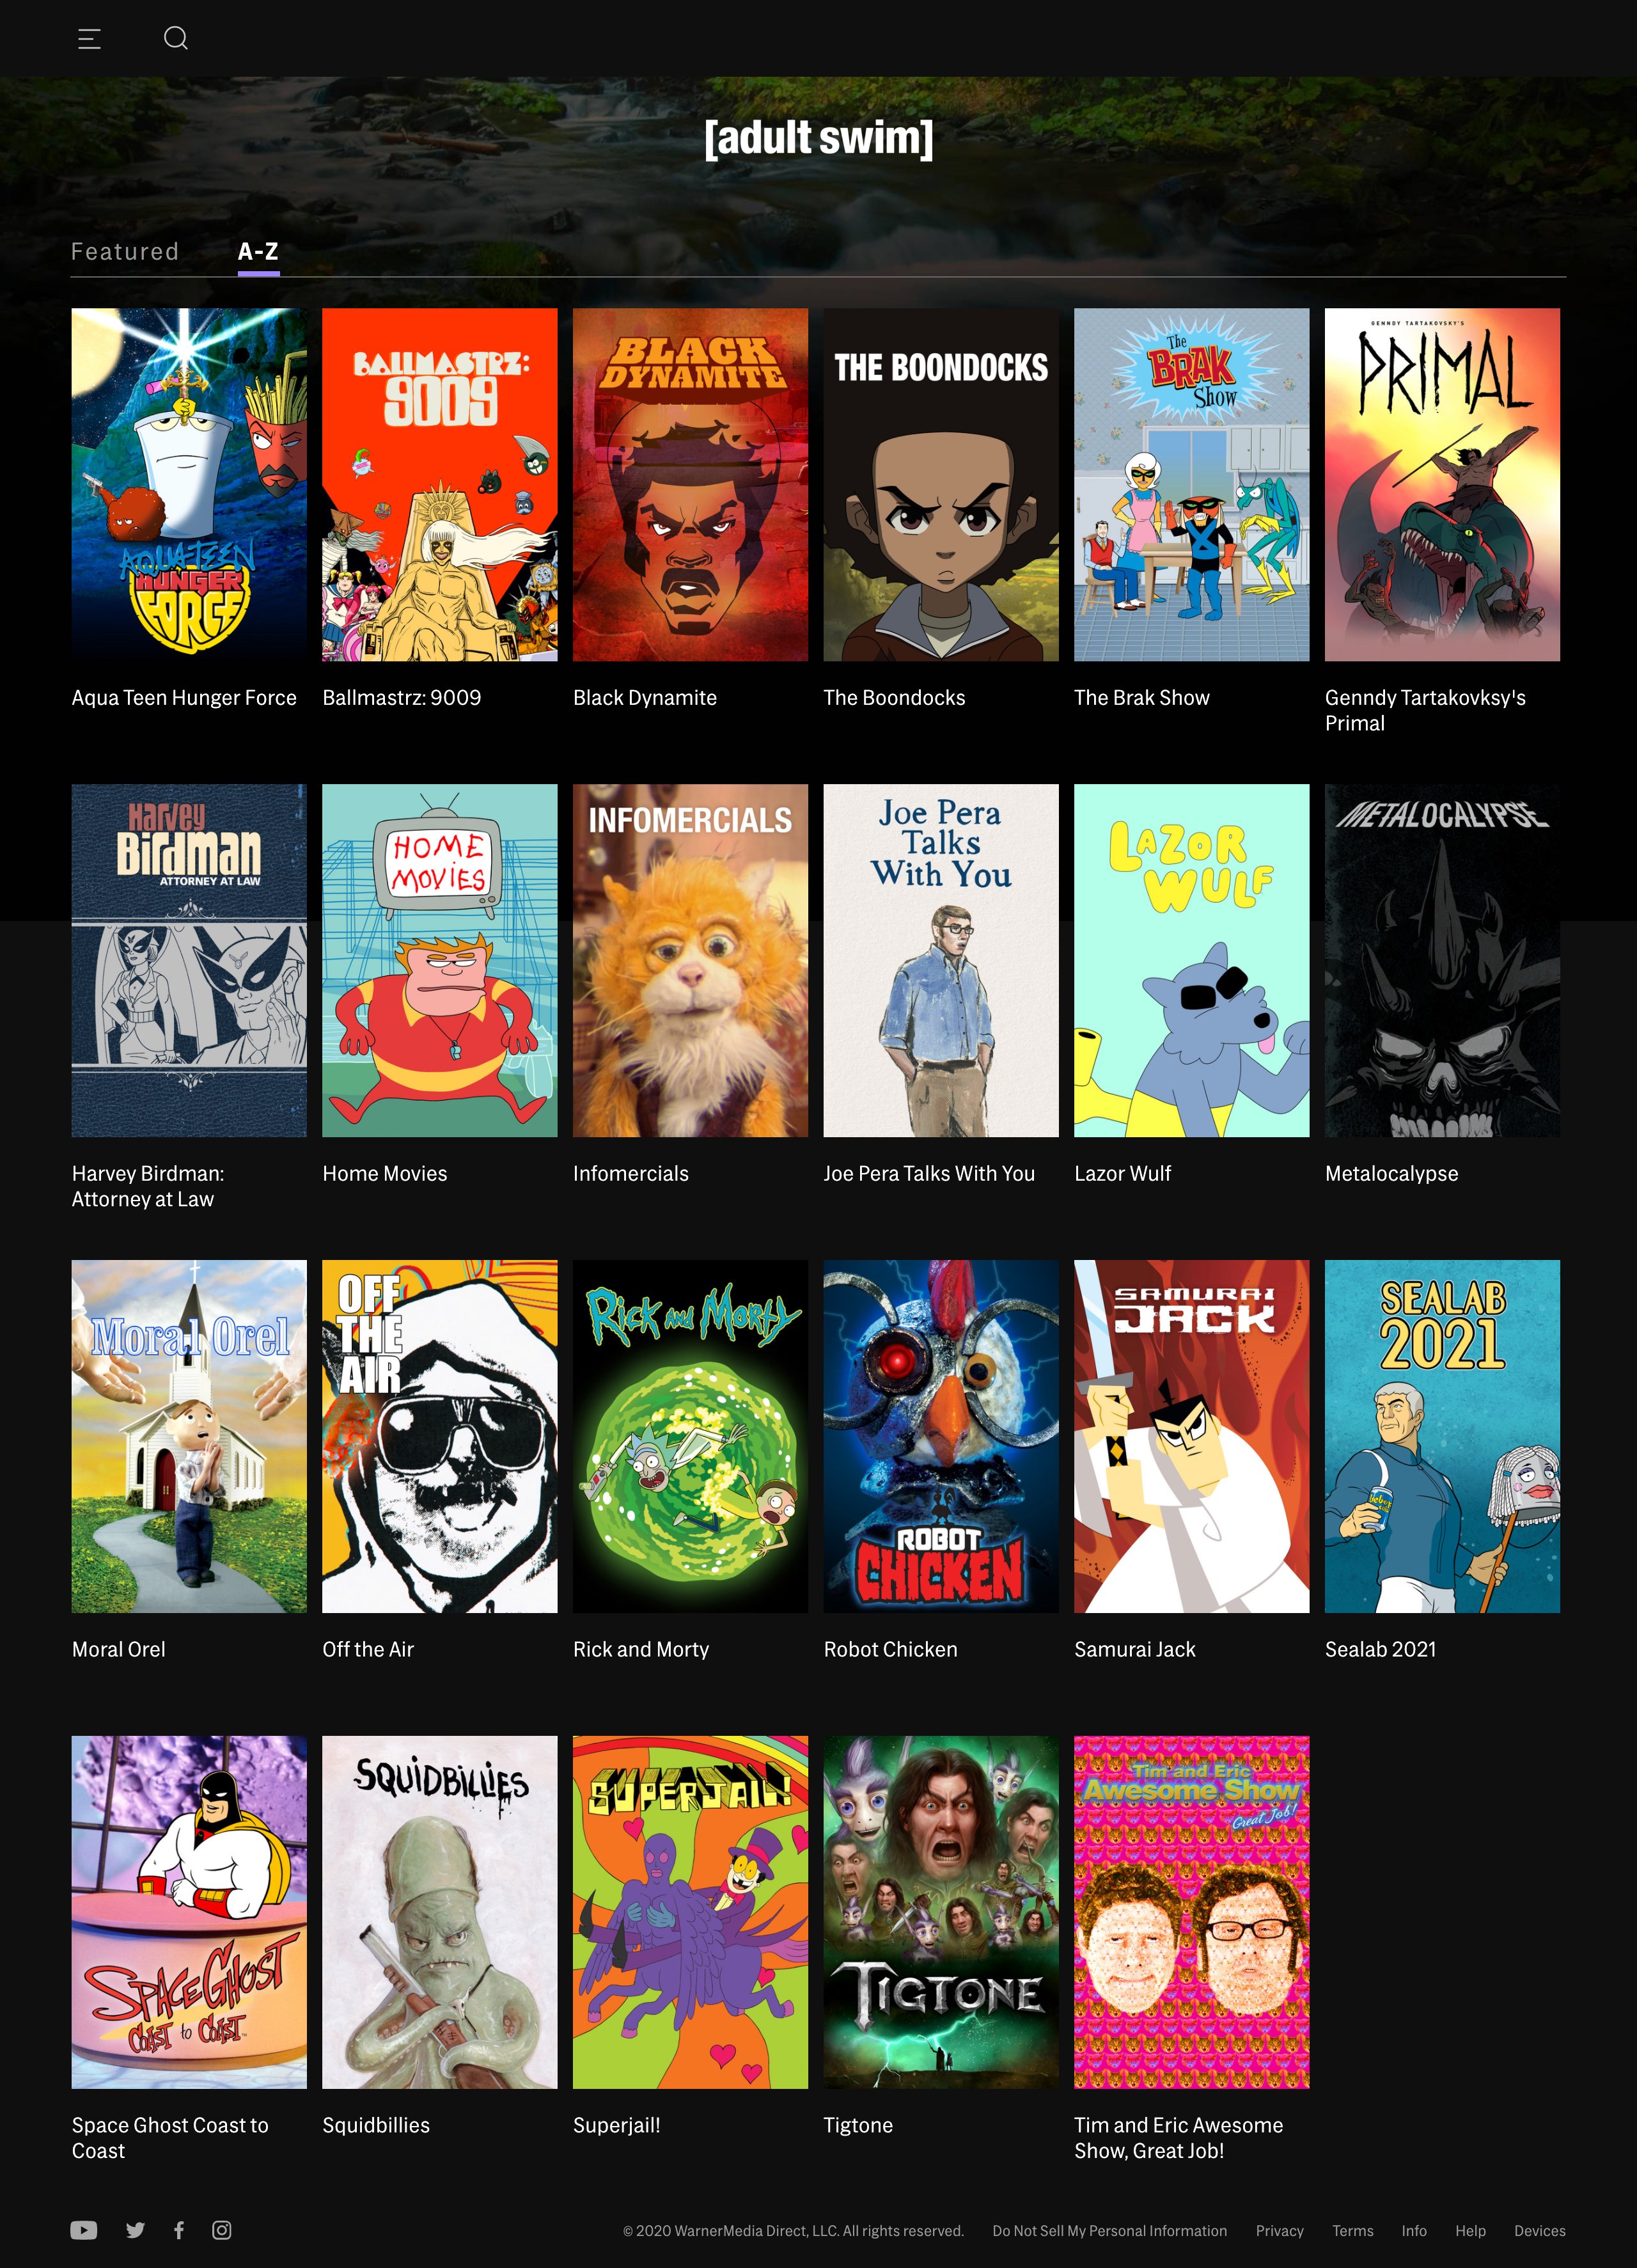 Showmax - We've got 🆕 Adult Swim favourites for you! What